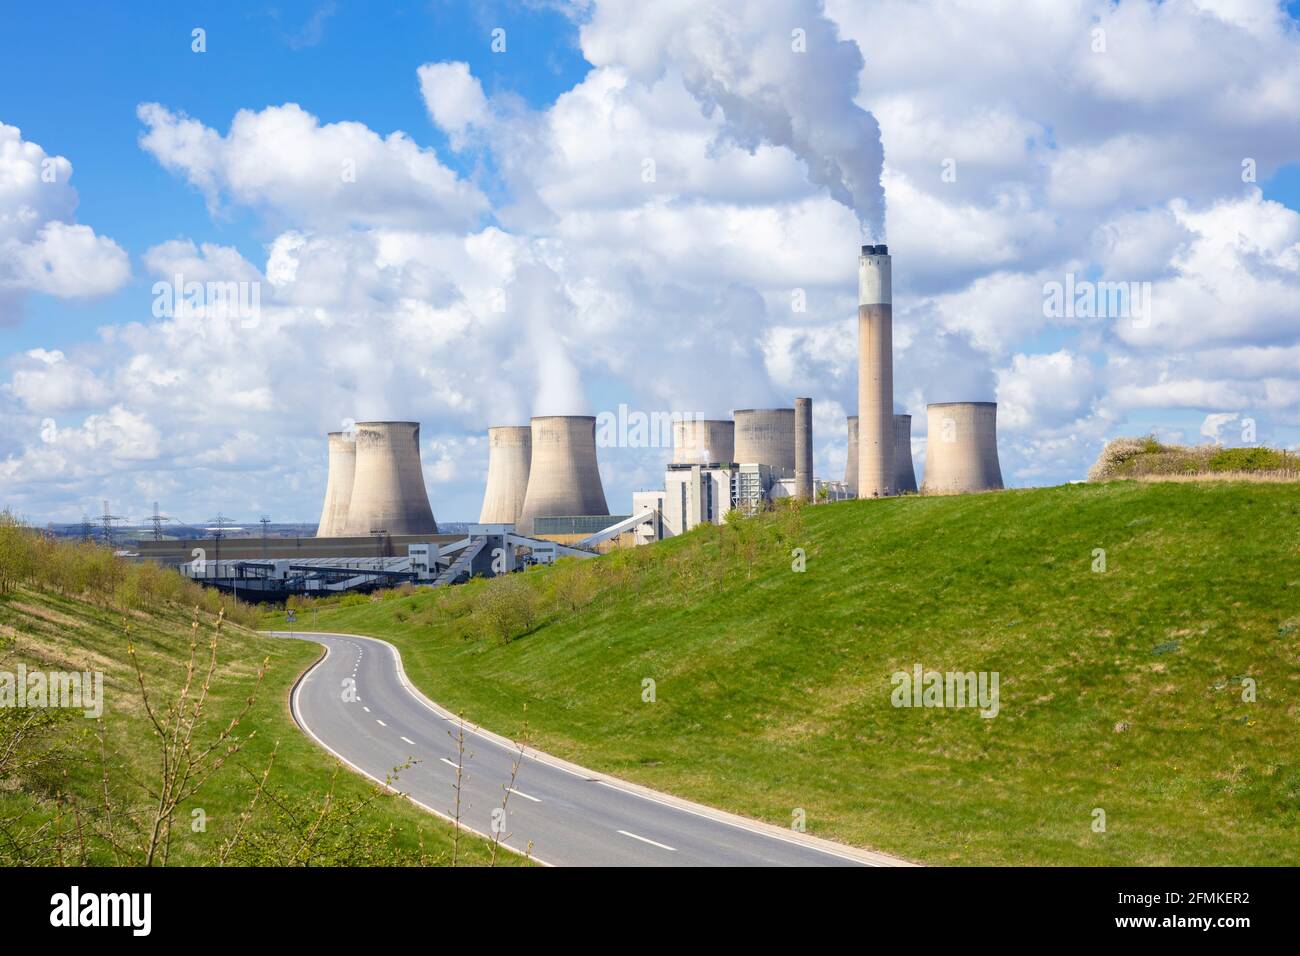 Winding road by Ratcliffe-on-Soar coal power station with steam from the cooling towers Ratcliffe on soar Nottinghamshire England UK GB Europe Stock Photo